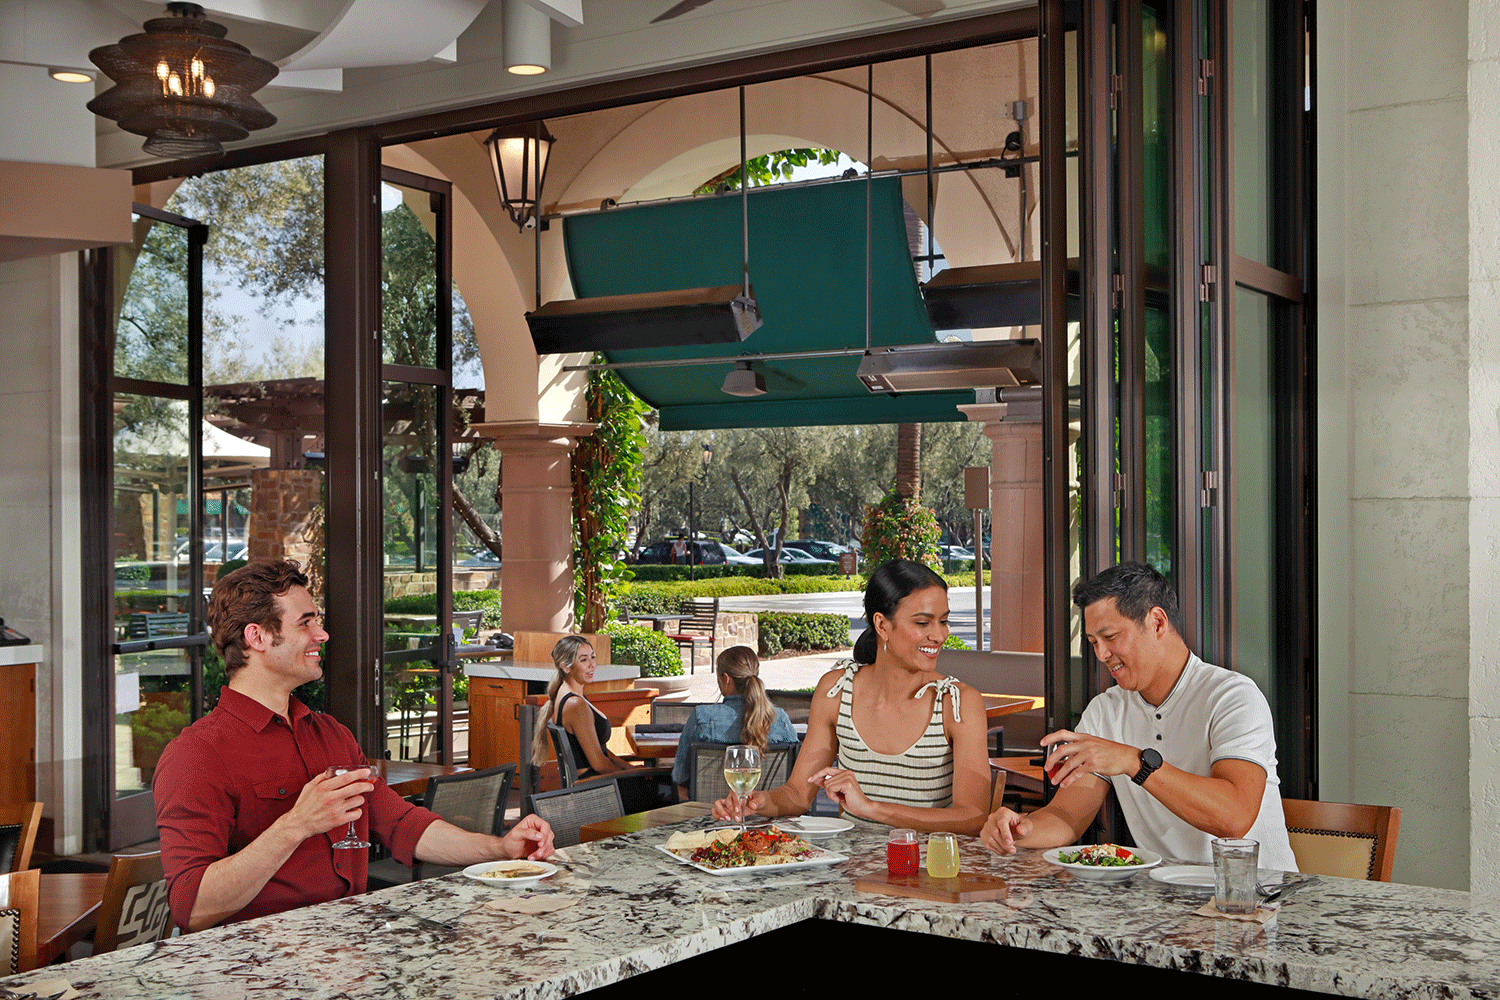  Interior view of customers eating at Zov's Bistro at Orchard Hills® Shopping Center